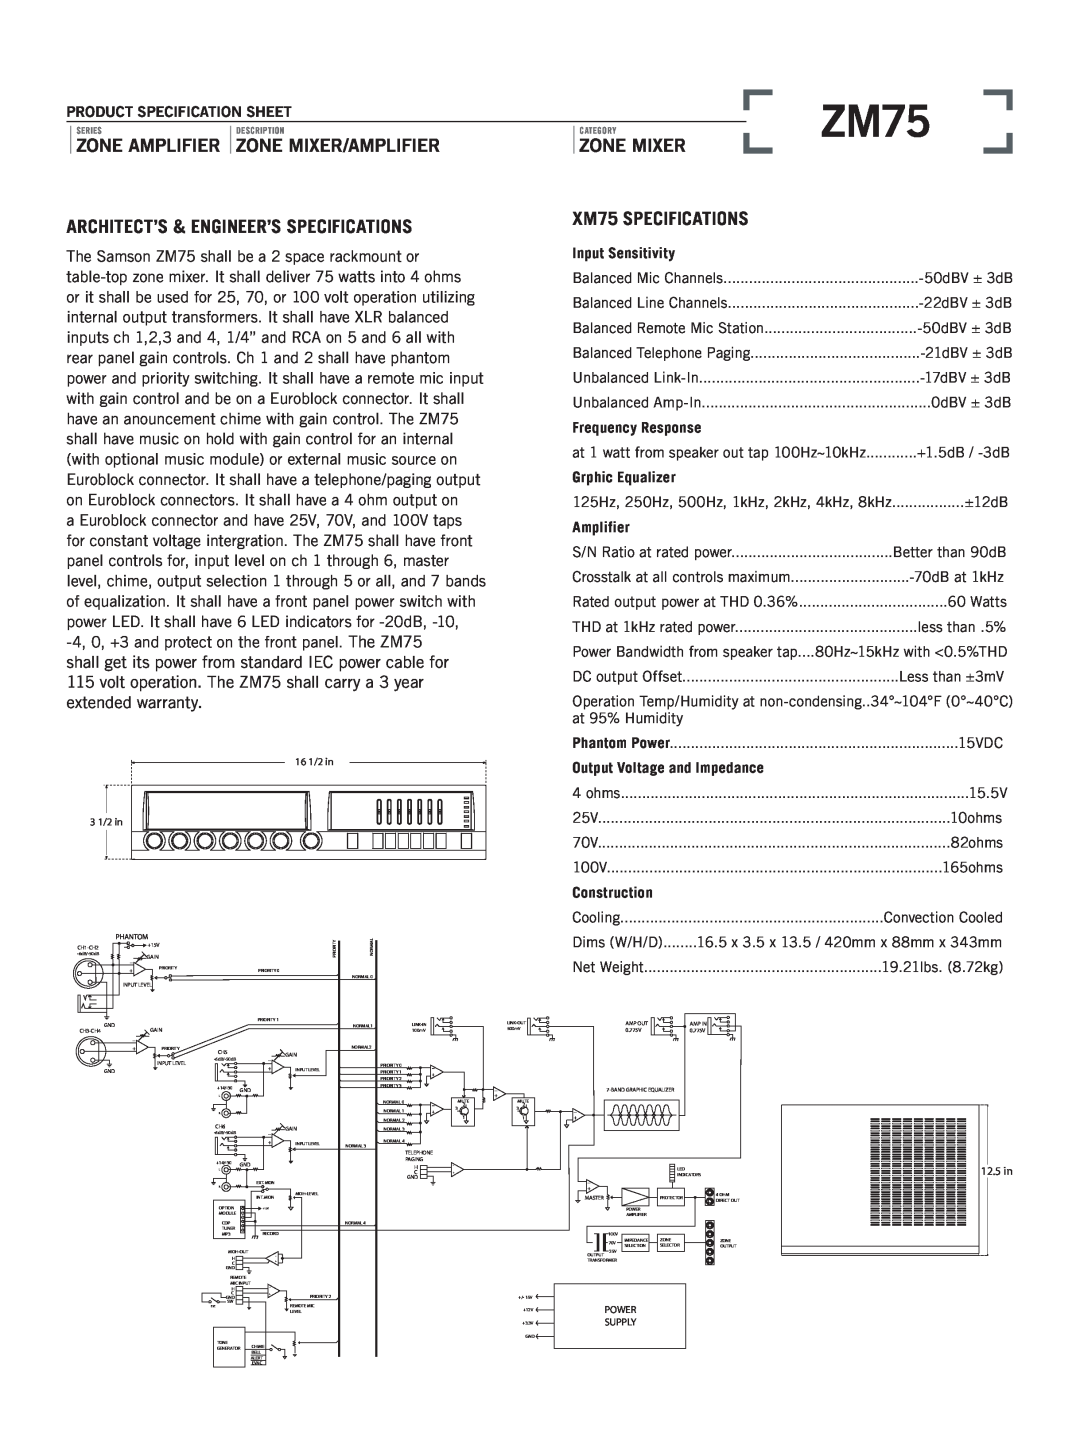 Samson ZM75 Architect’S & Engineer’S Specifications, XM75 SPECIFICATIONS, Zone Amplifier, Zone Mixer/Amplifier 